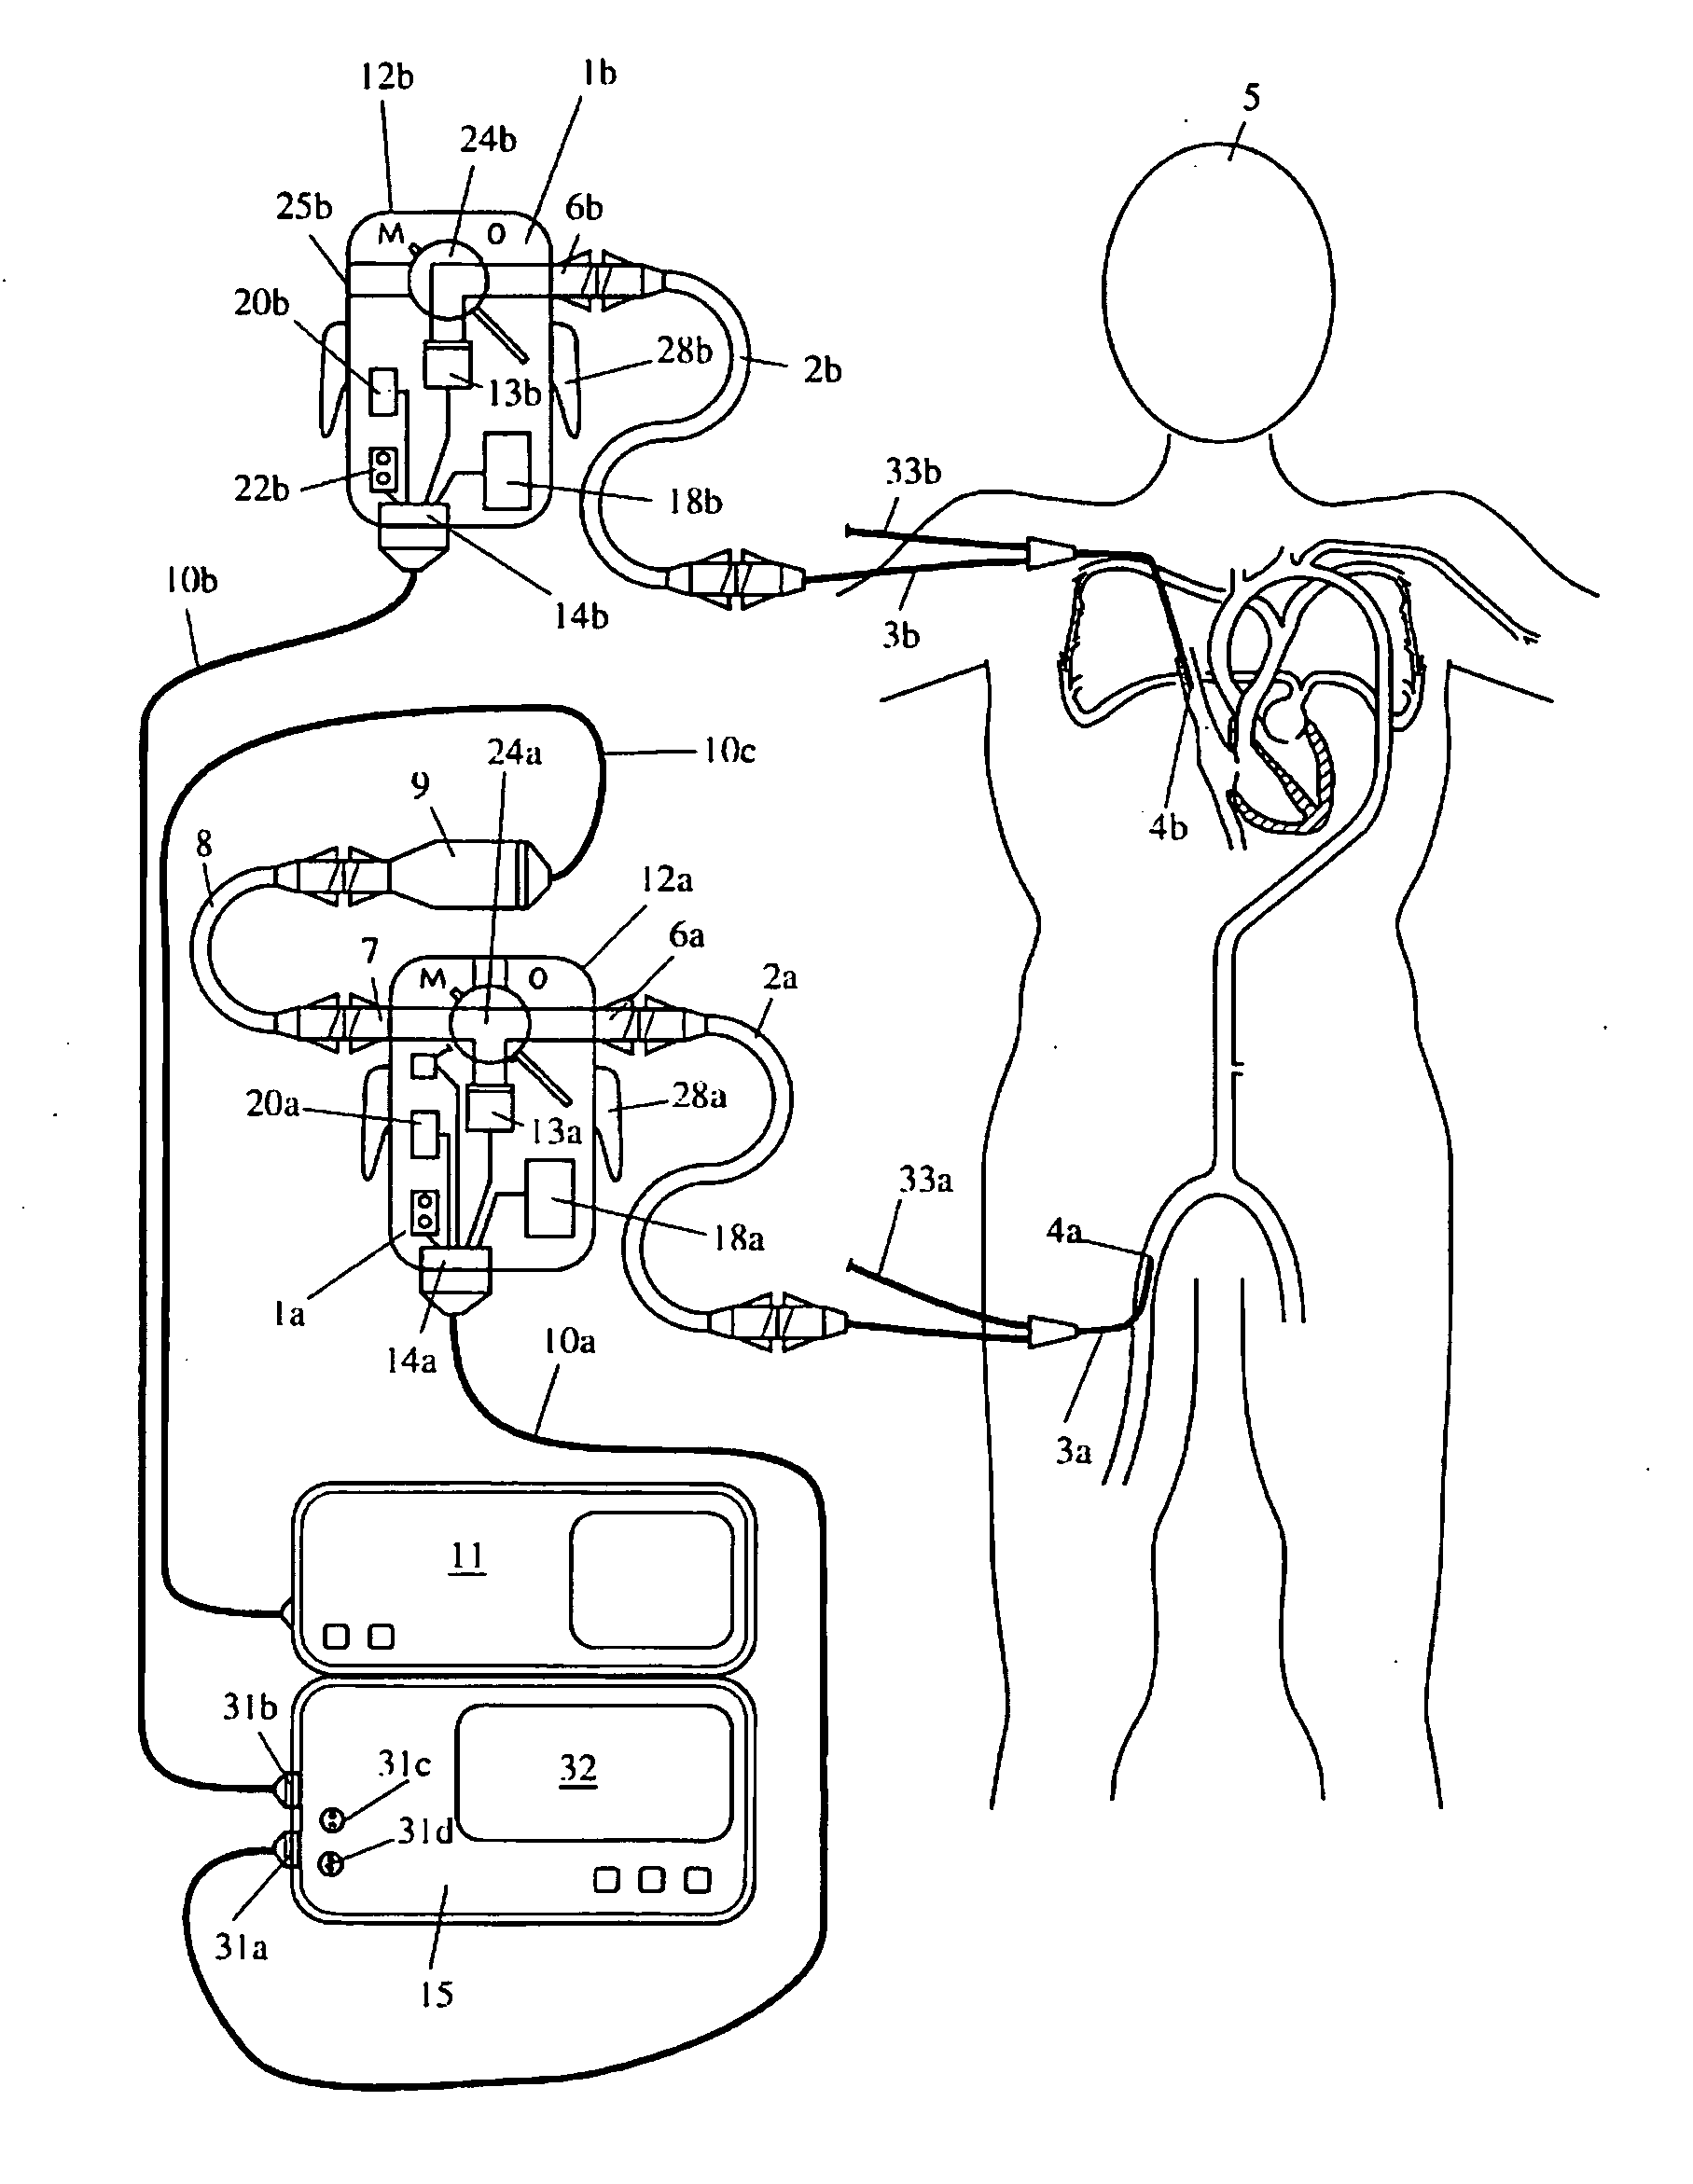 Portable sensor device and patient monitor